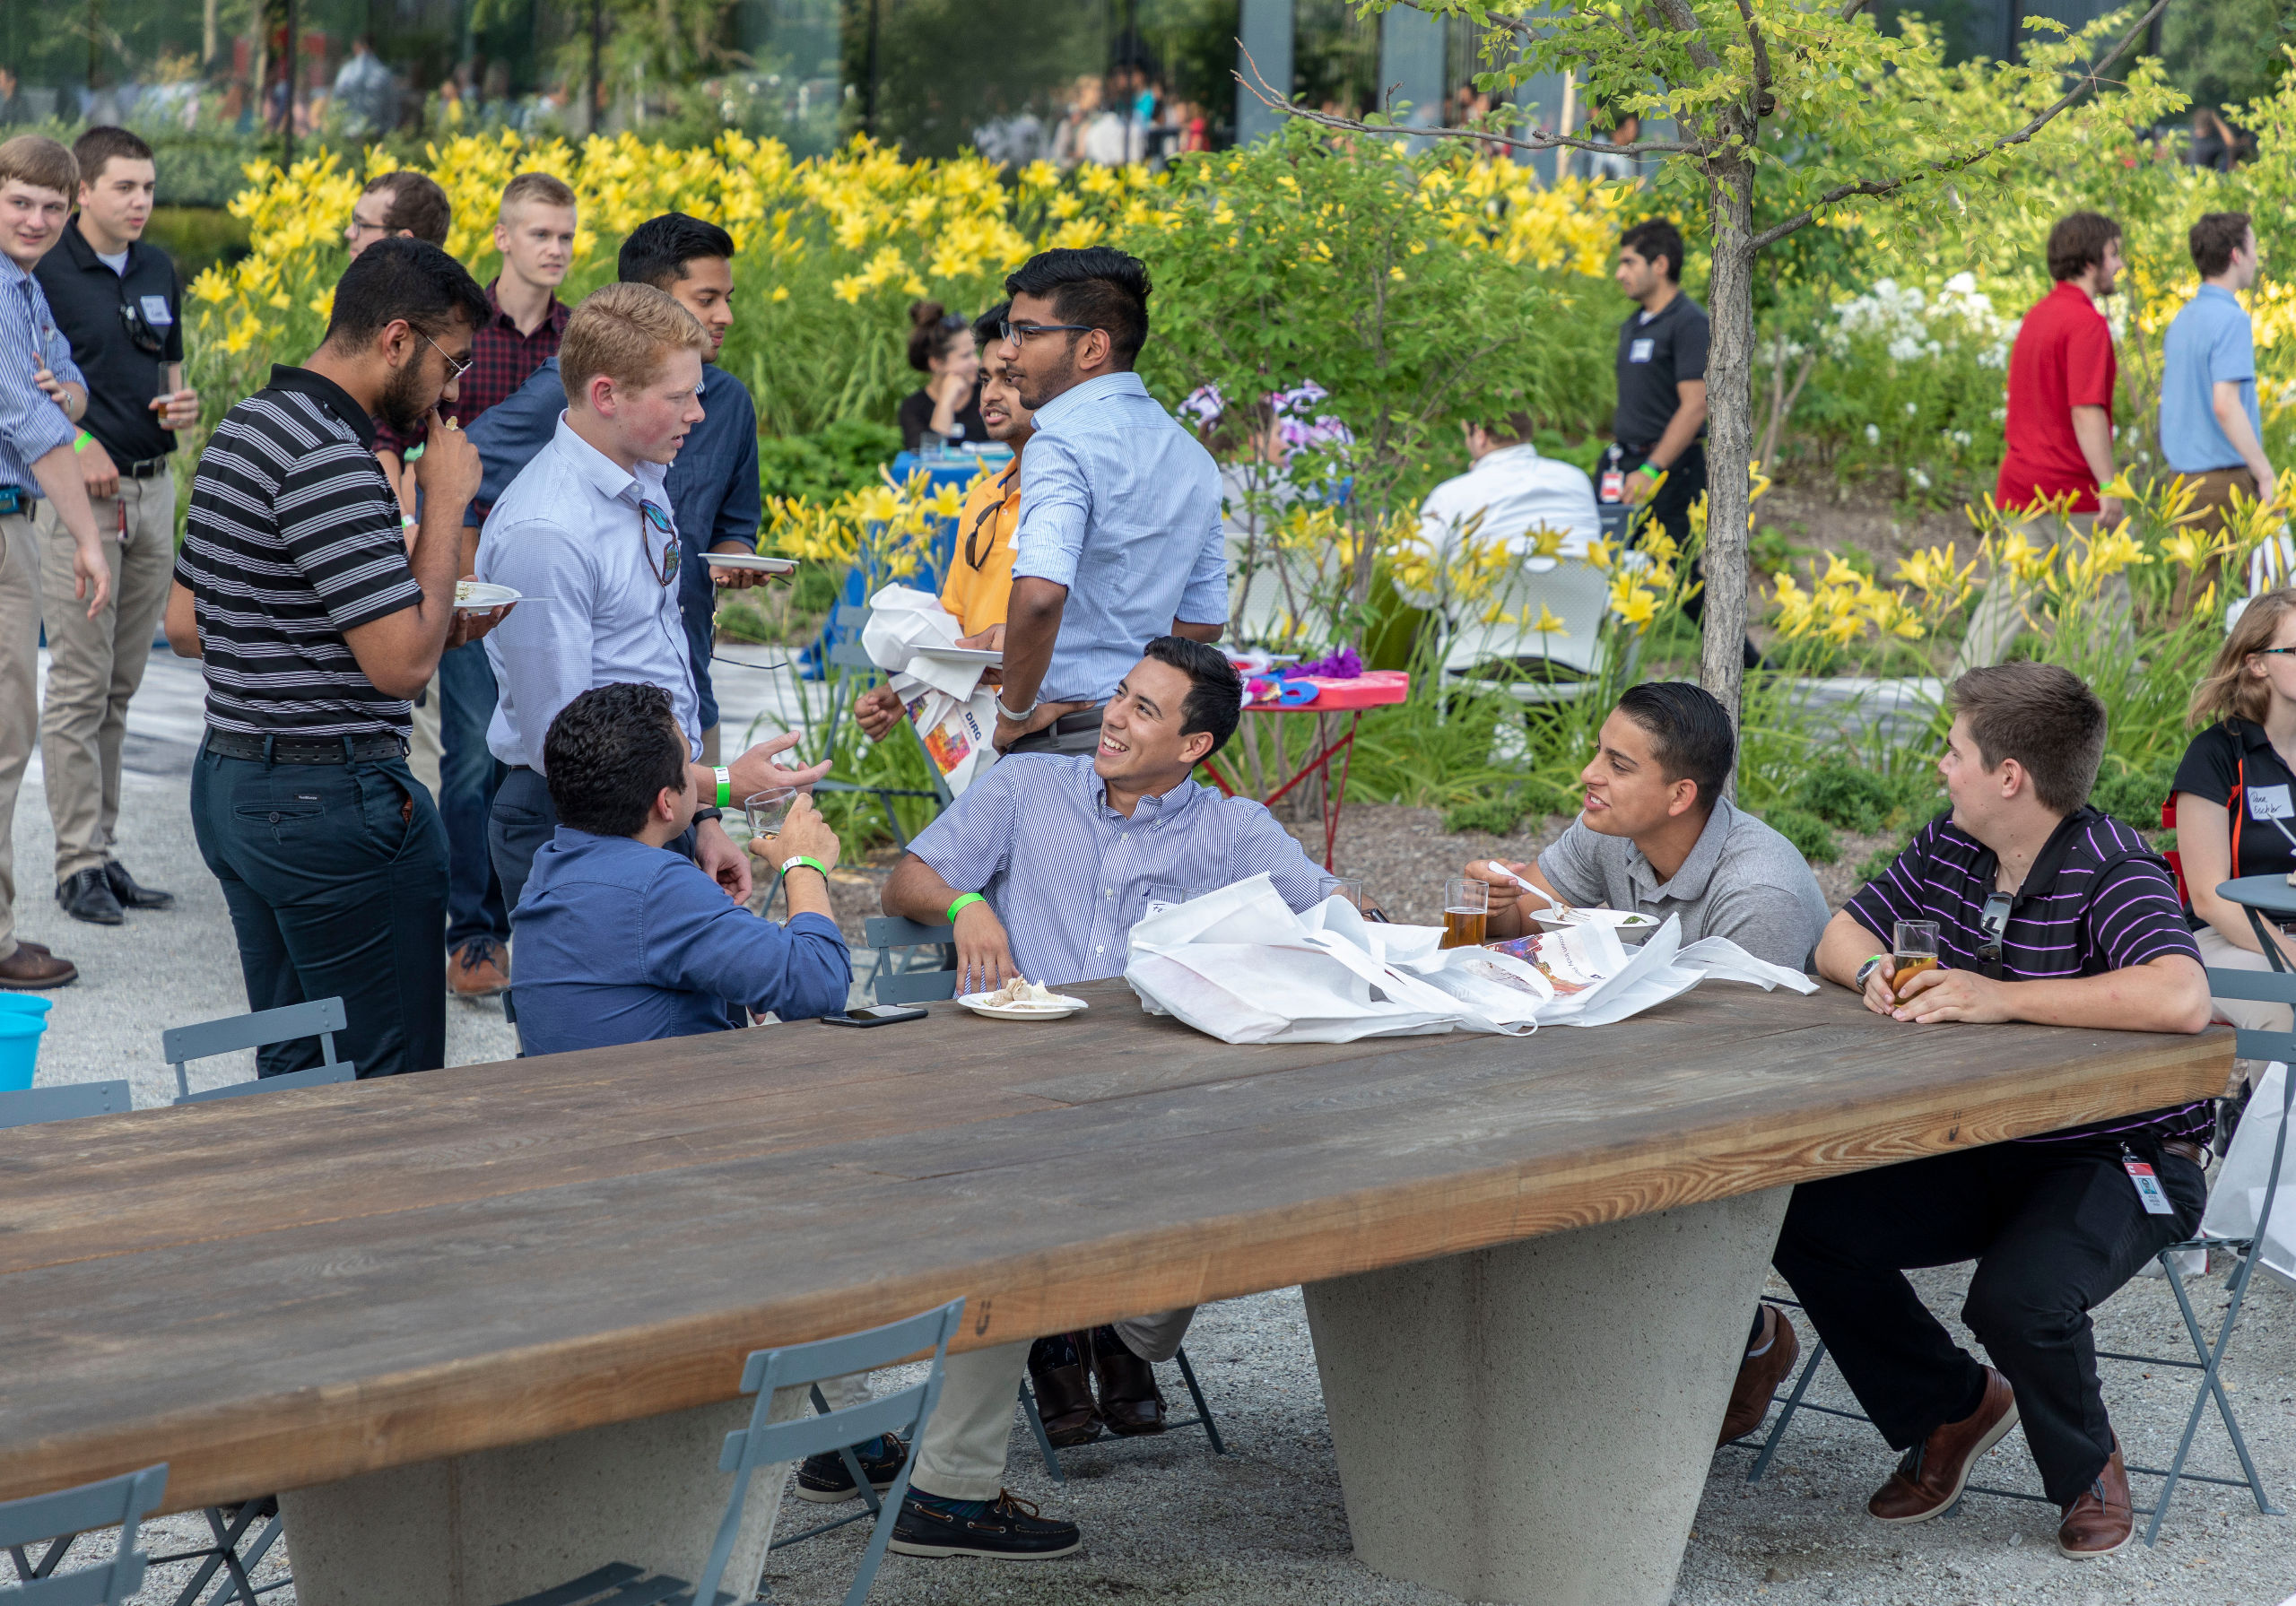 Group of young men sitting at outdoor table eating and drinking.